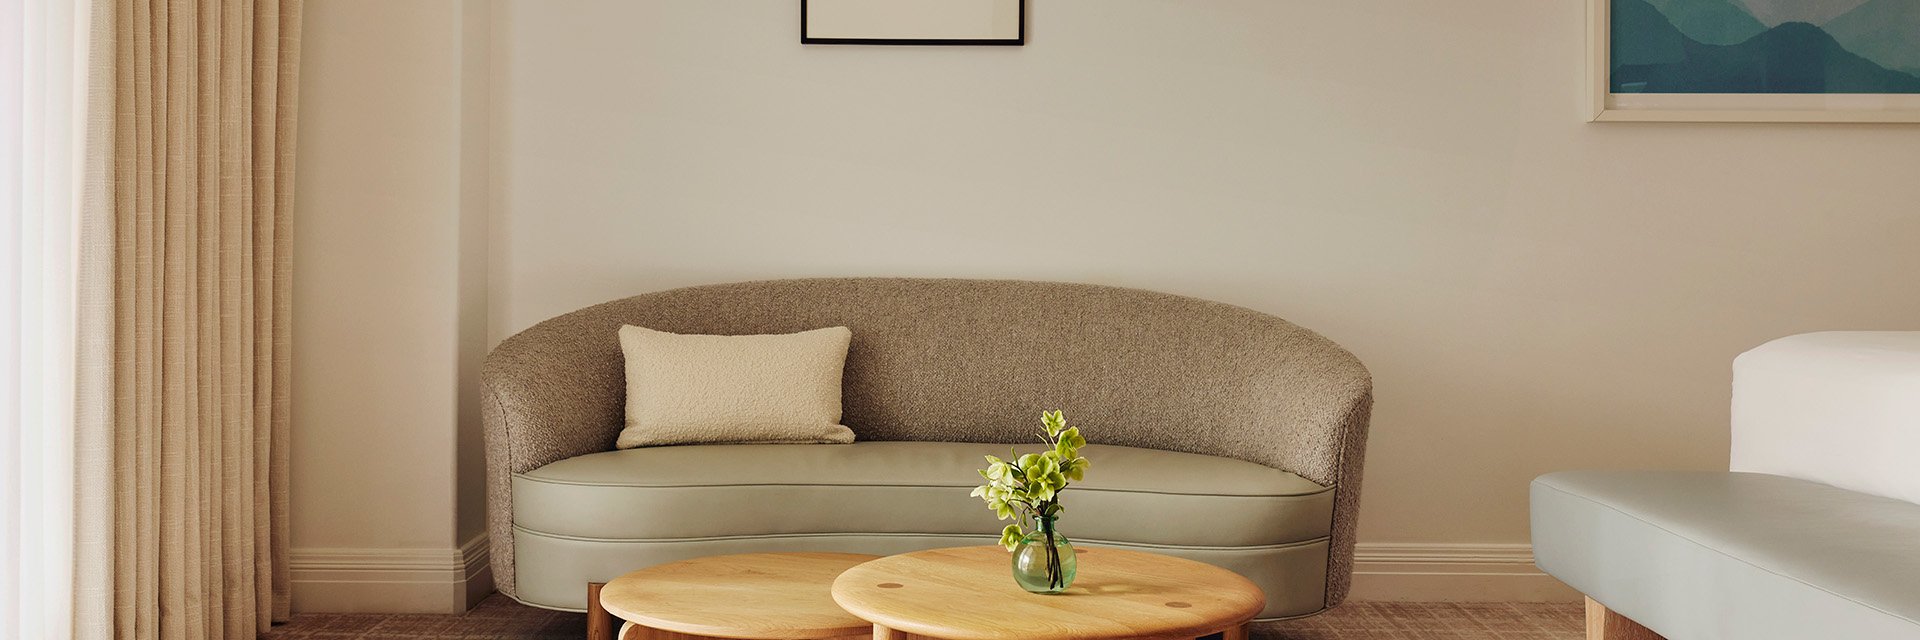 A curved ivory couch with a small, white pillow. A potted green plant sitting on a wooden coffee table.